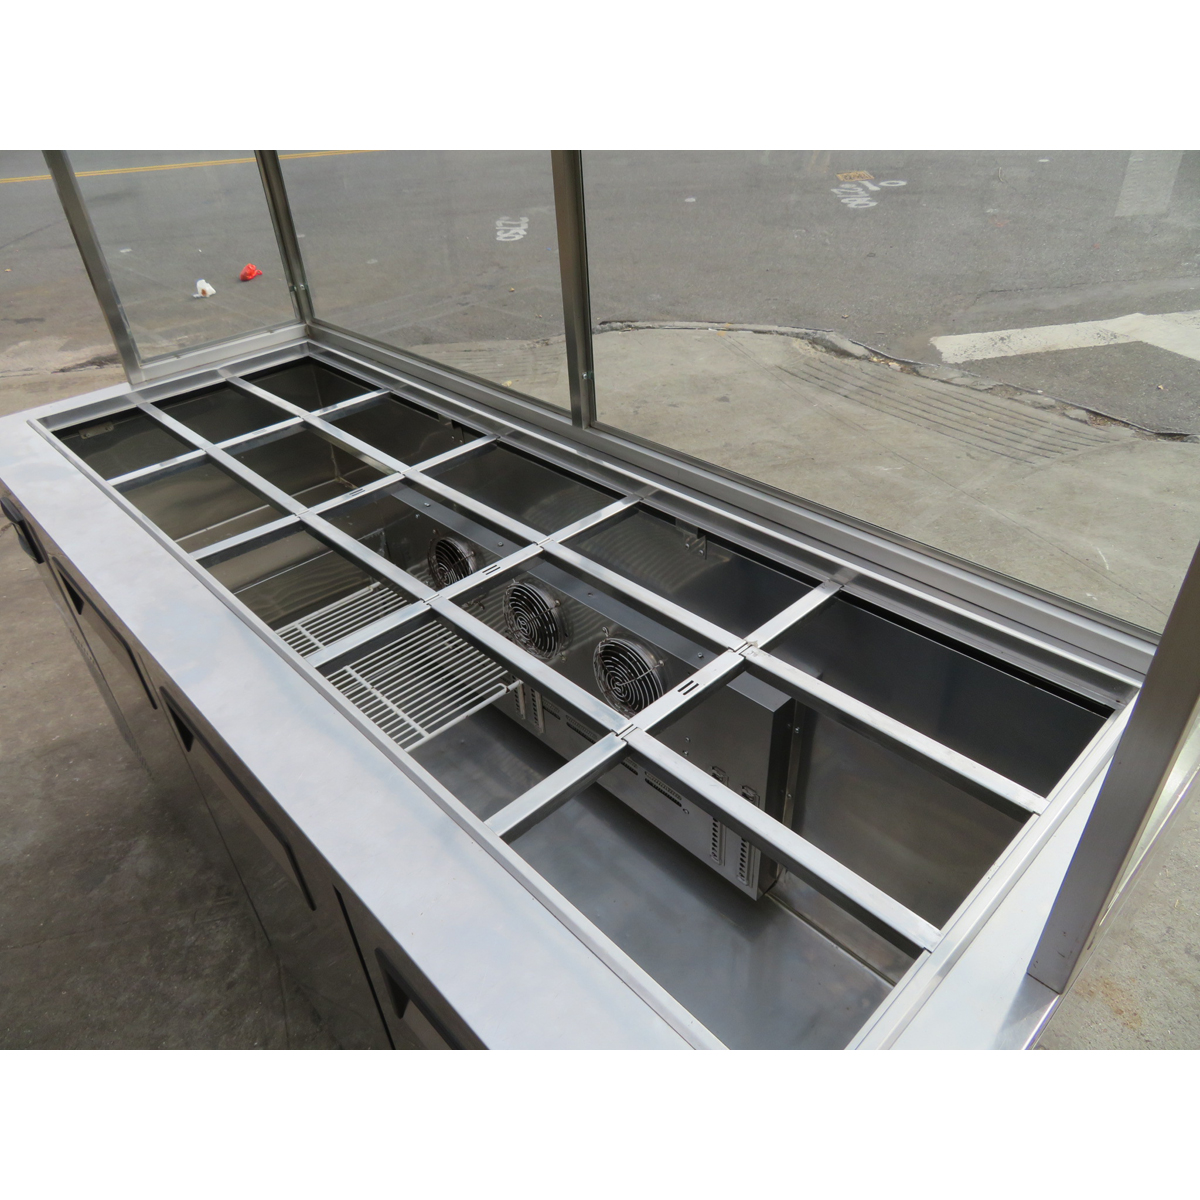 Turbo Air JBT-72 Refrigerated Salad Bar with Custom Enclosed Sneeze Guard, Used Great Condition image 2